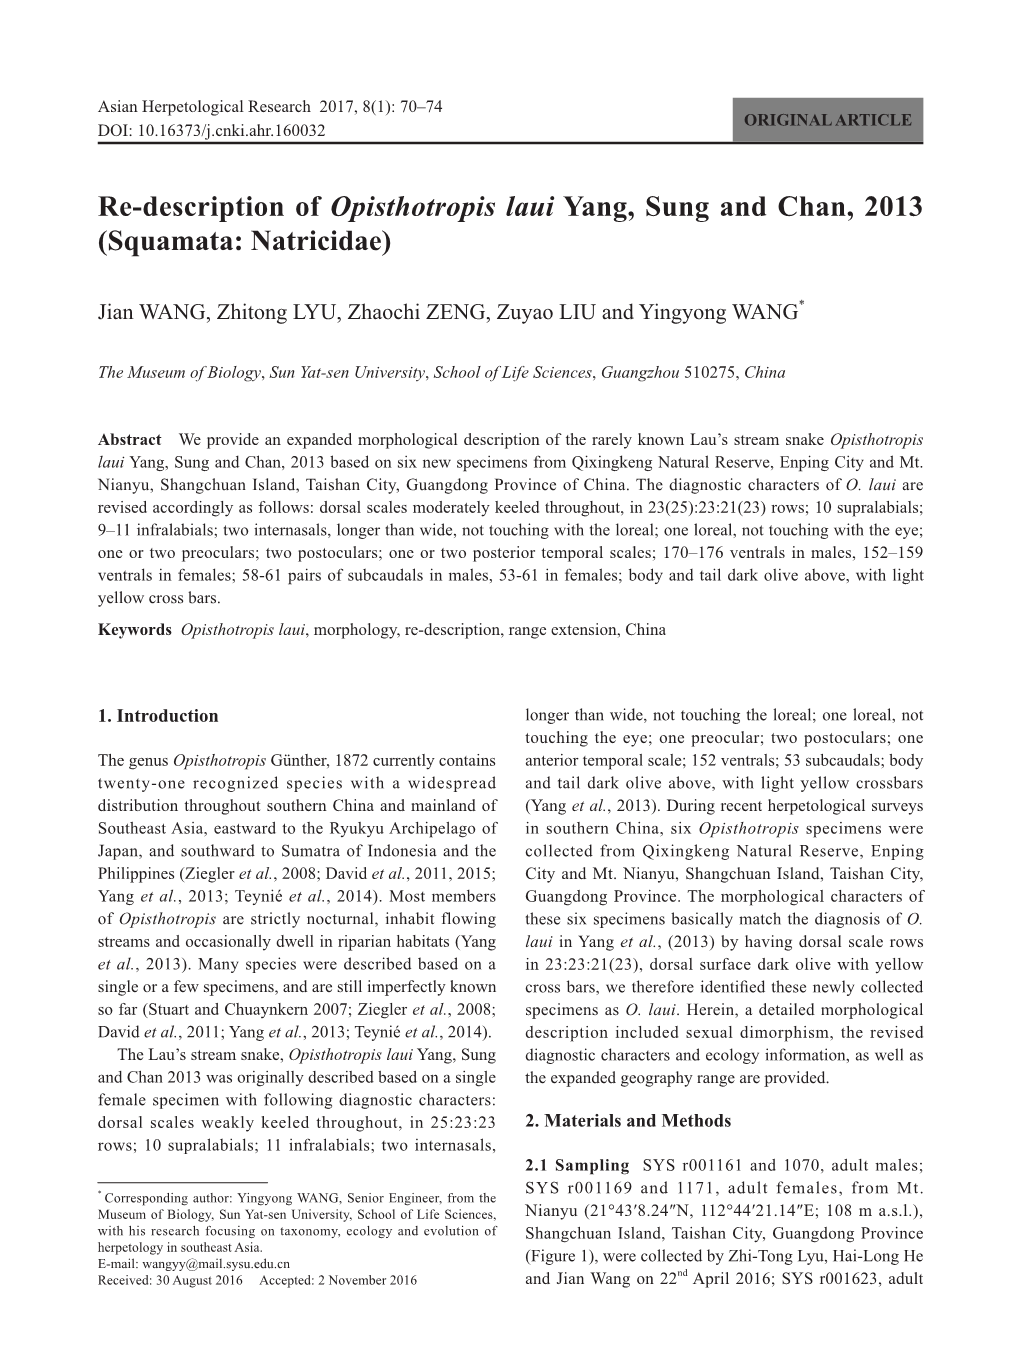 Re-Description of Opisthotropis Laui Yang, Sung and Chan, 2013 (Squamata: Natricidae)